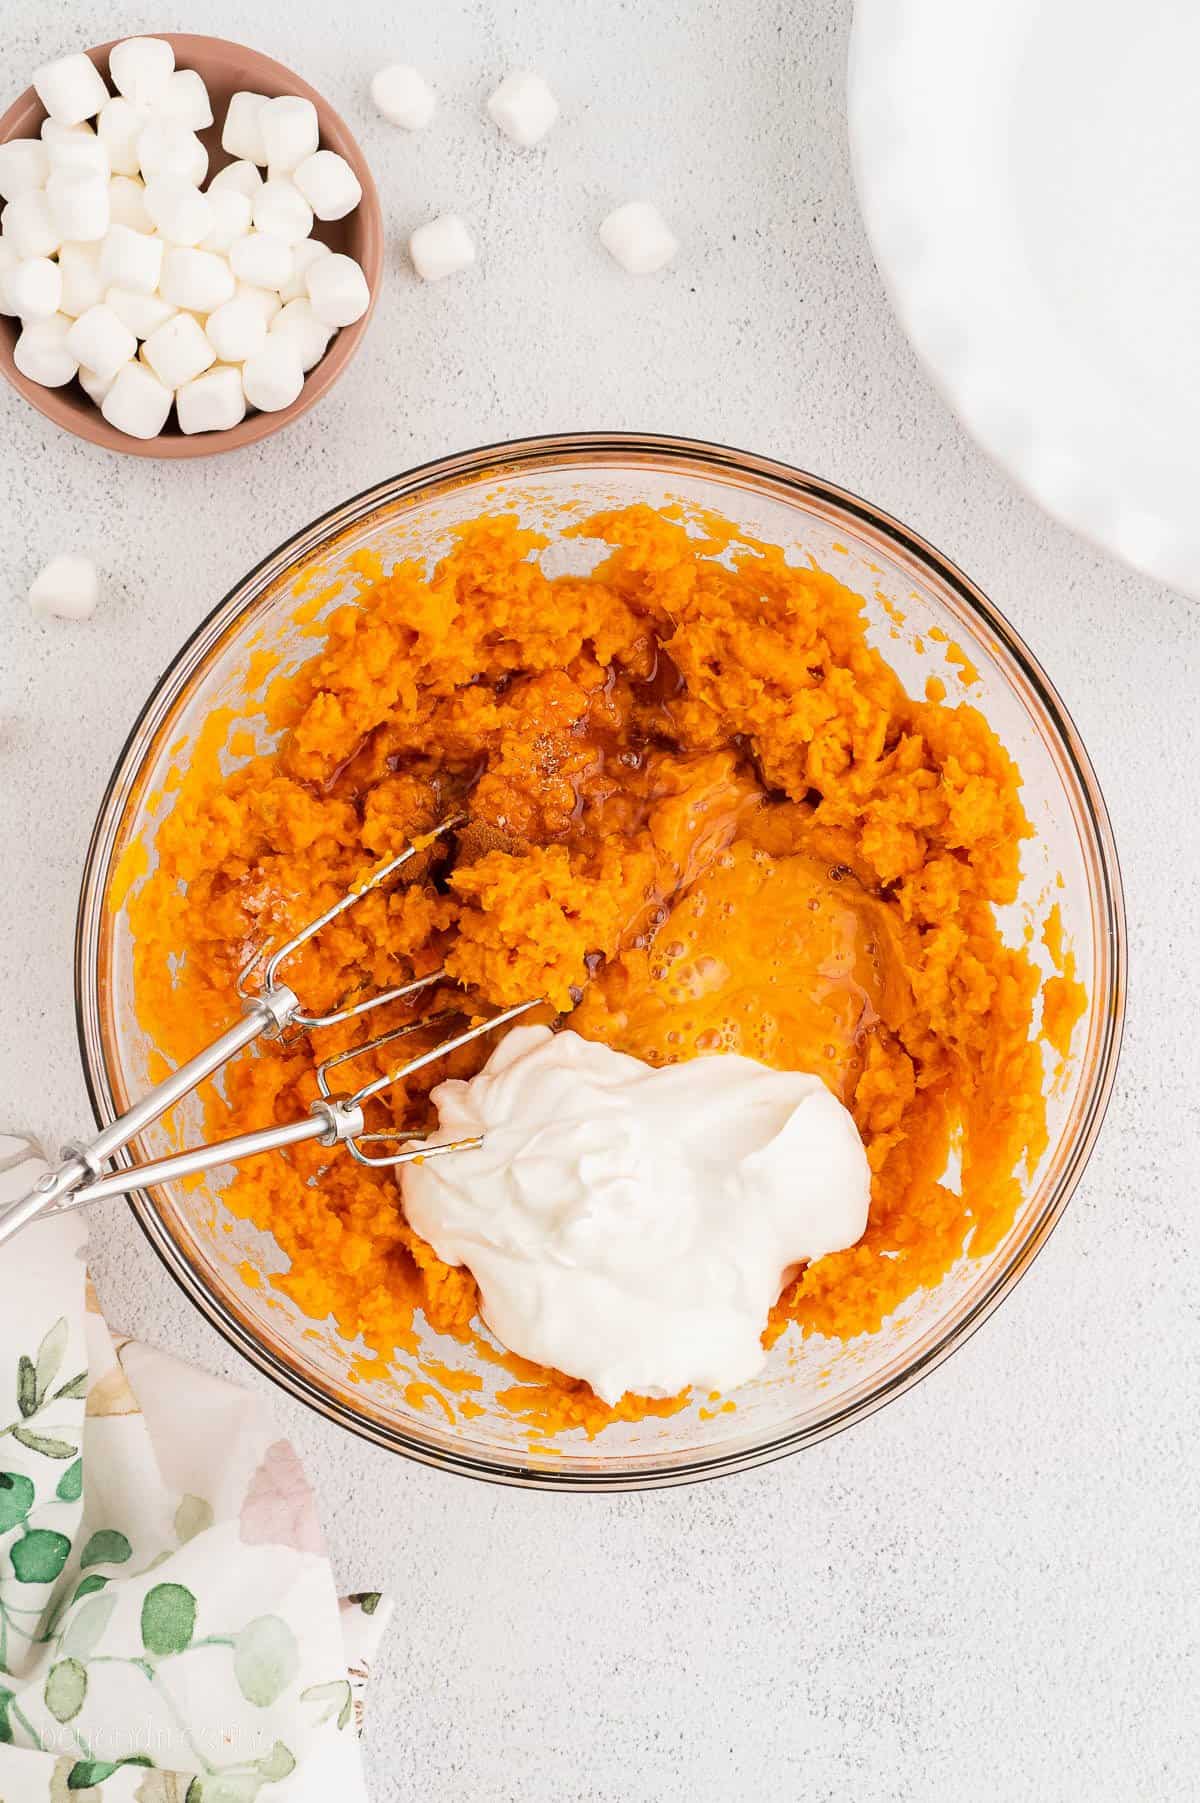 Eggs and yogurt are added to mashed sweet potatoes to created sweet potato casserole filling.